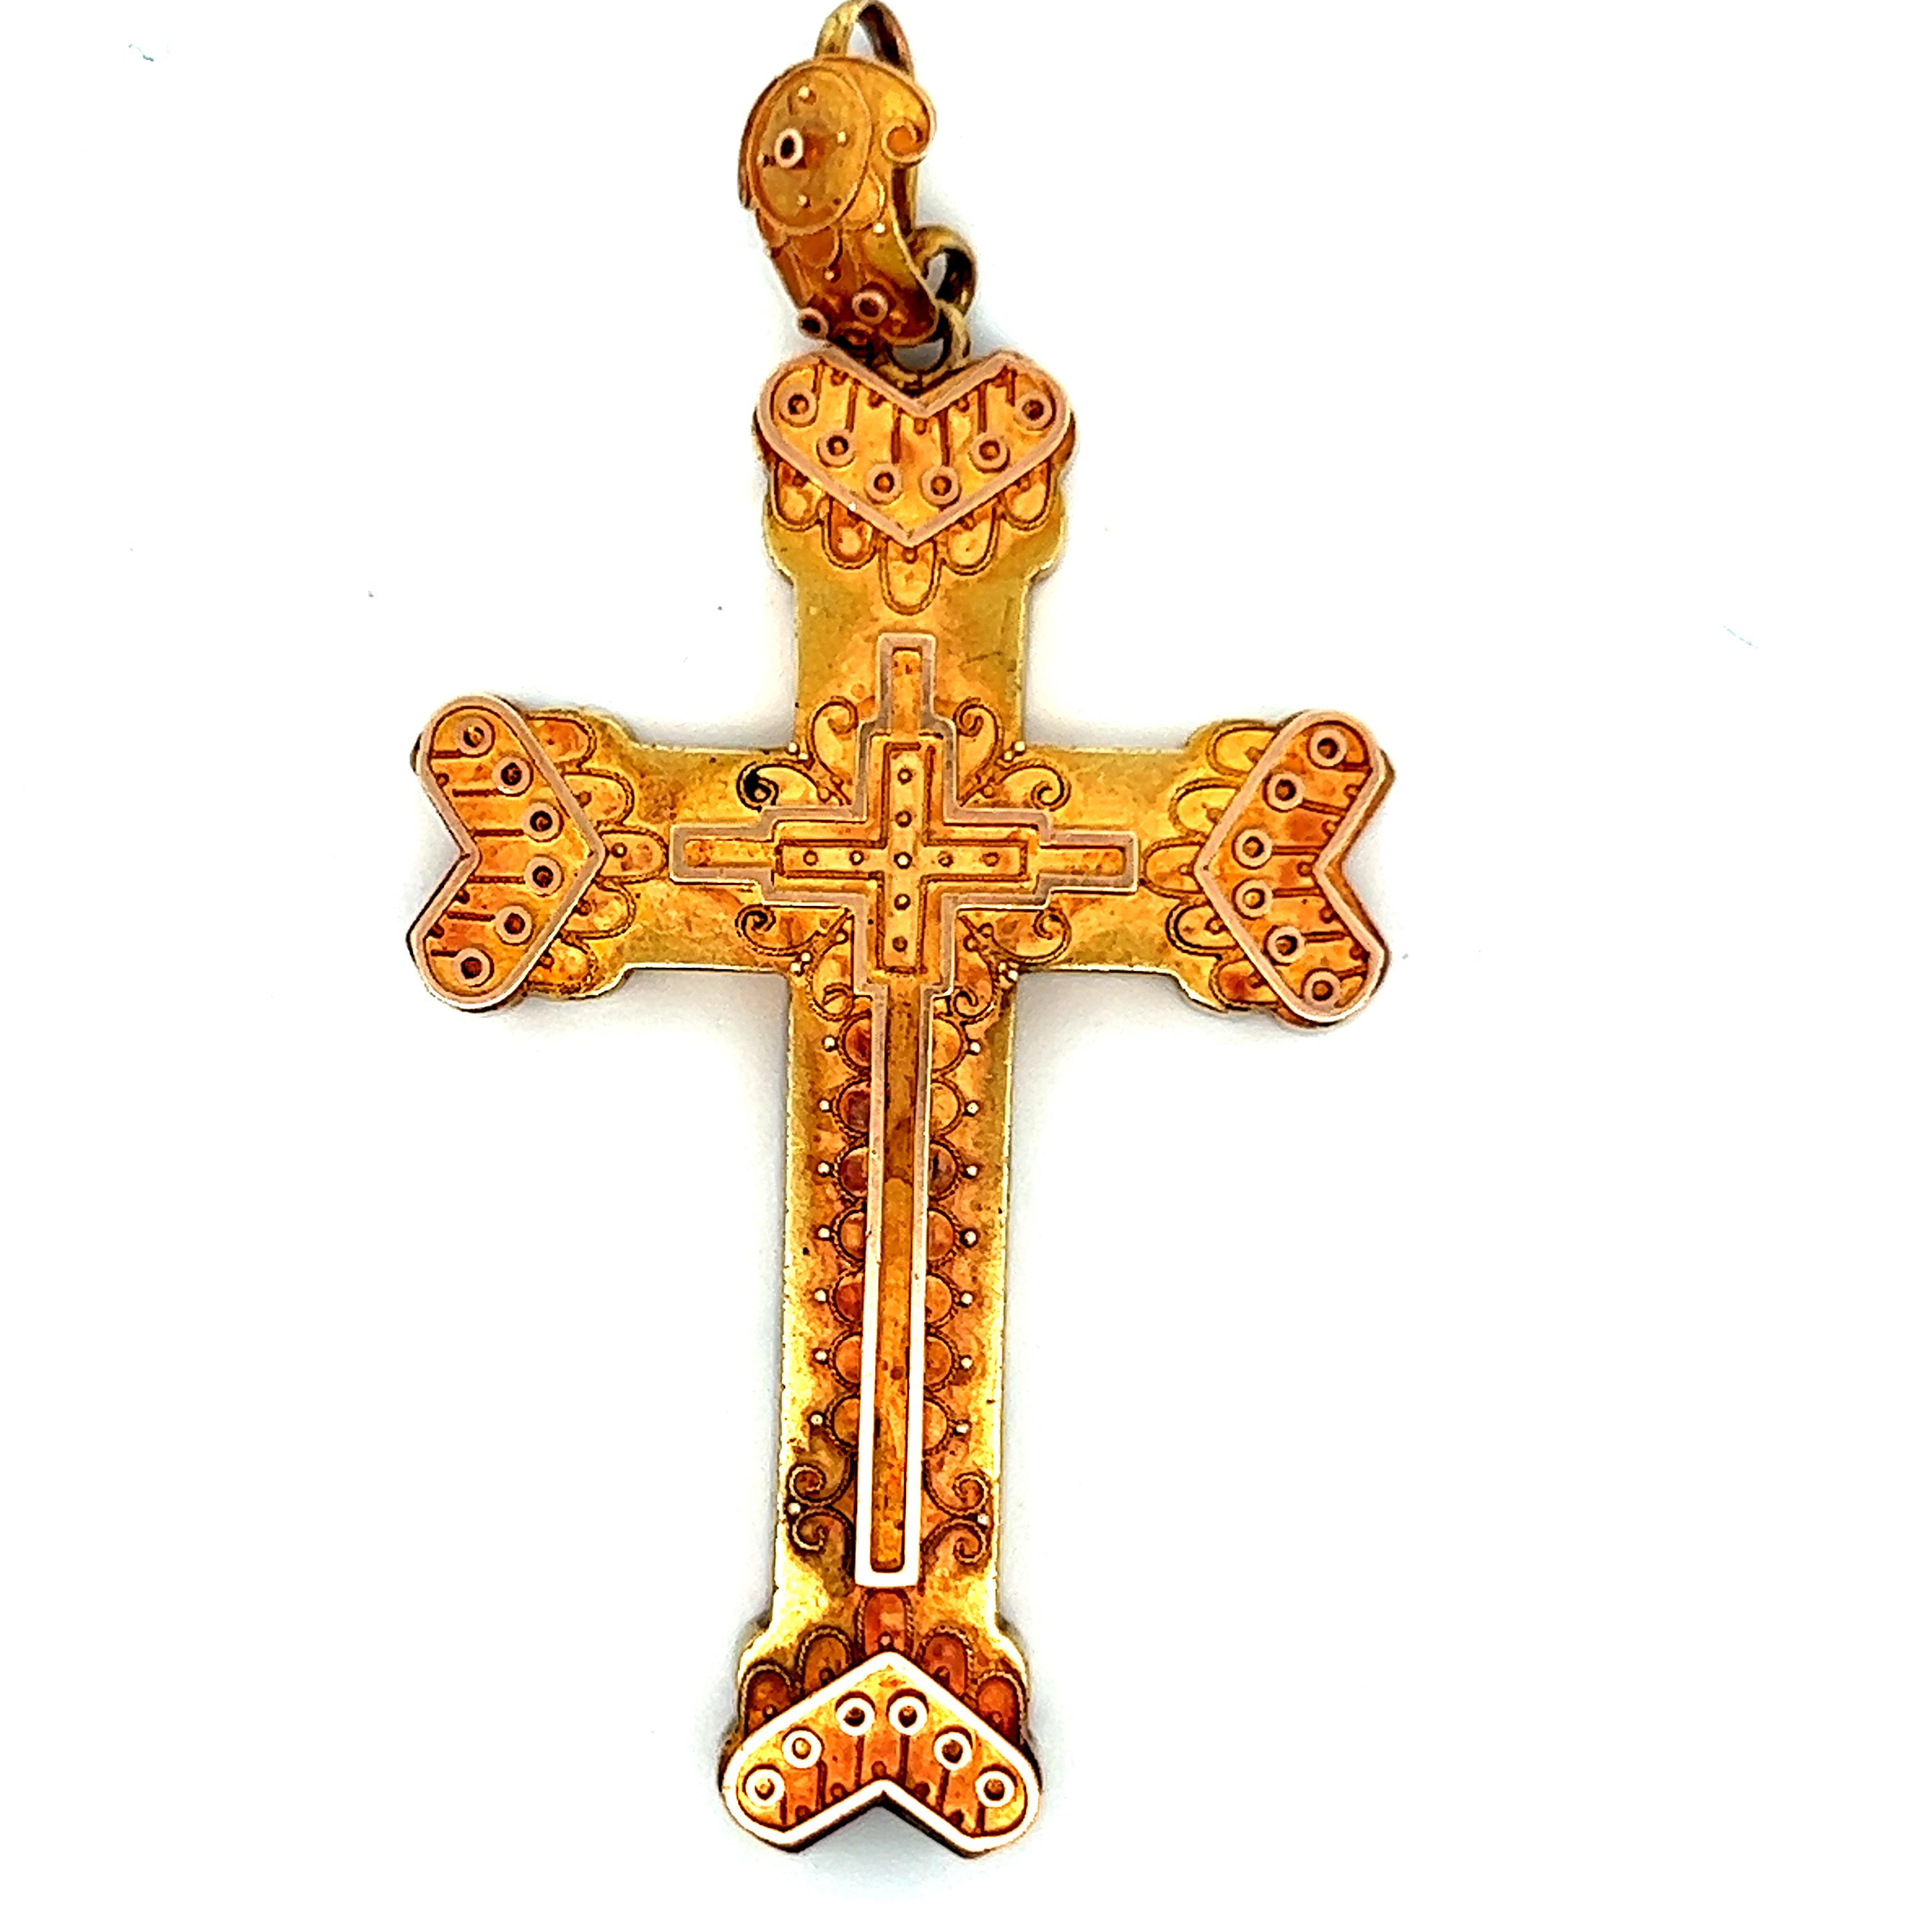 This lovely cross/pendant is 1870 Etruscan and is made in 14k yellow gold. This cross contains beautiful engravings all over the cross providing exquisite detail and design. This cross also features a large bale at the top of the cross so this cross